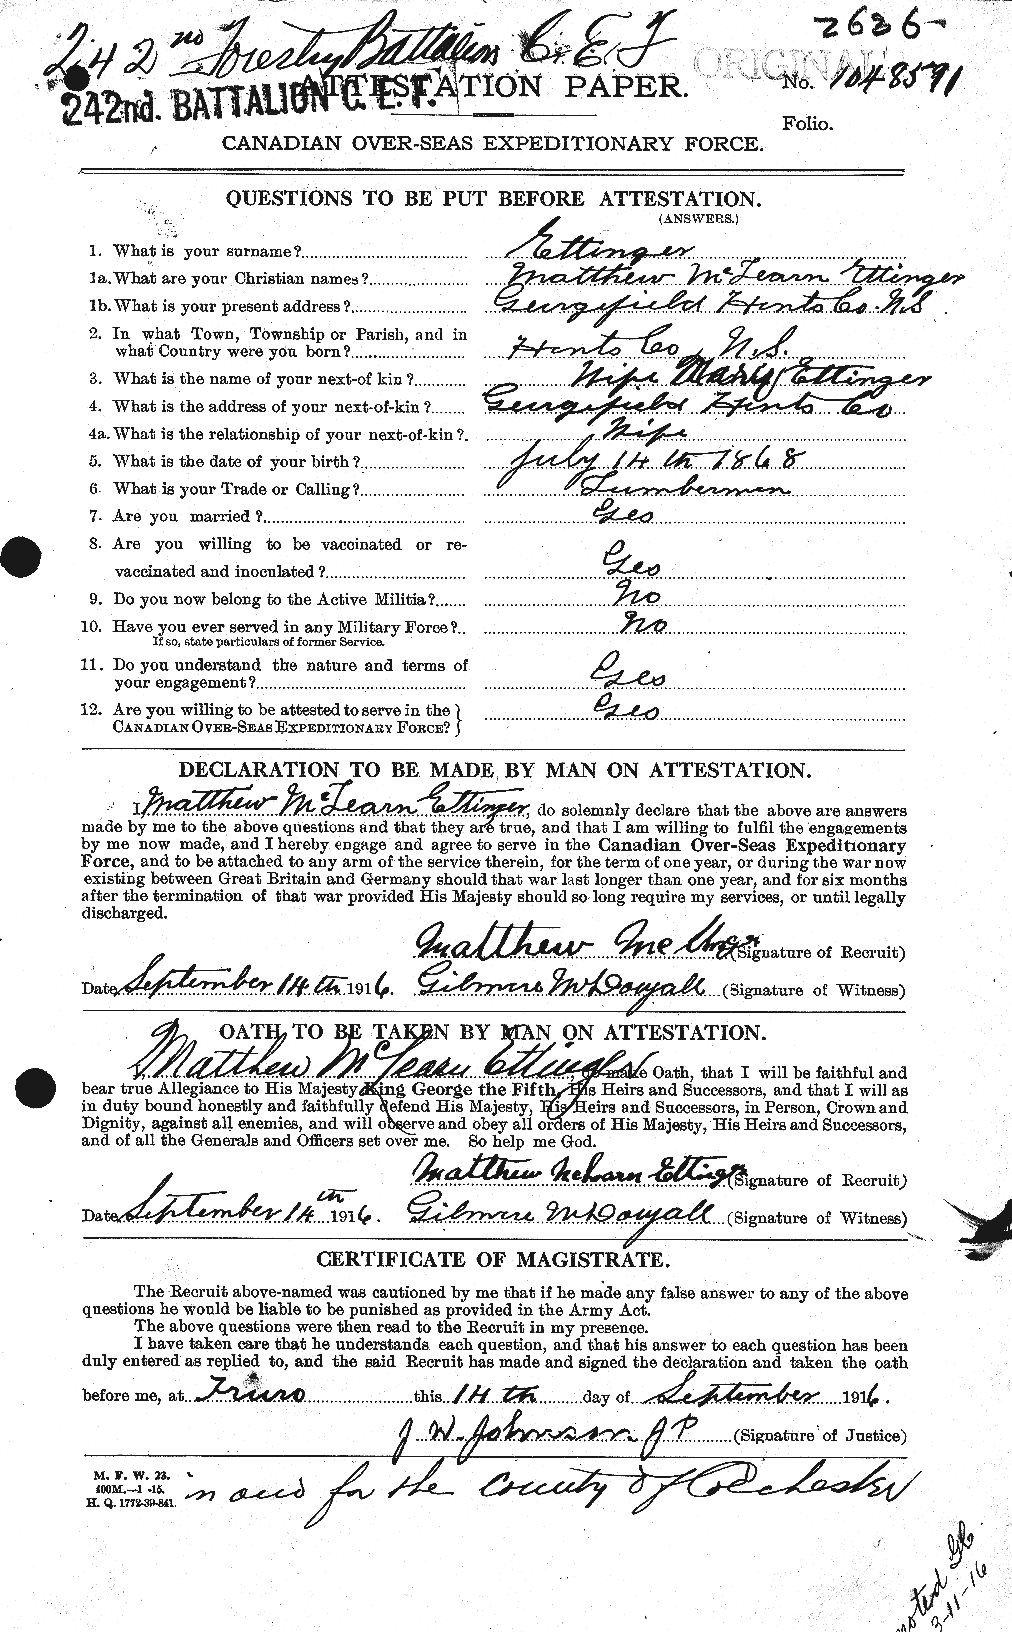 Personnel Records of the First World War - CEF 314772a